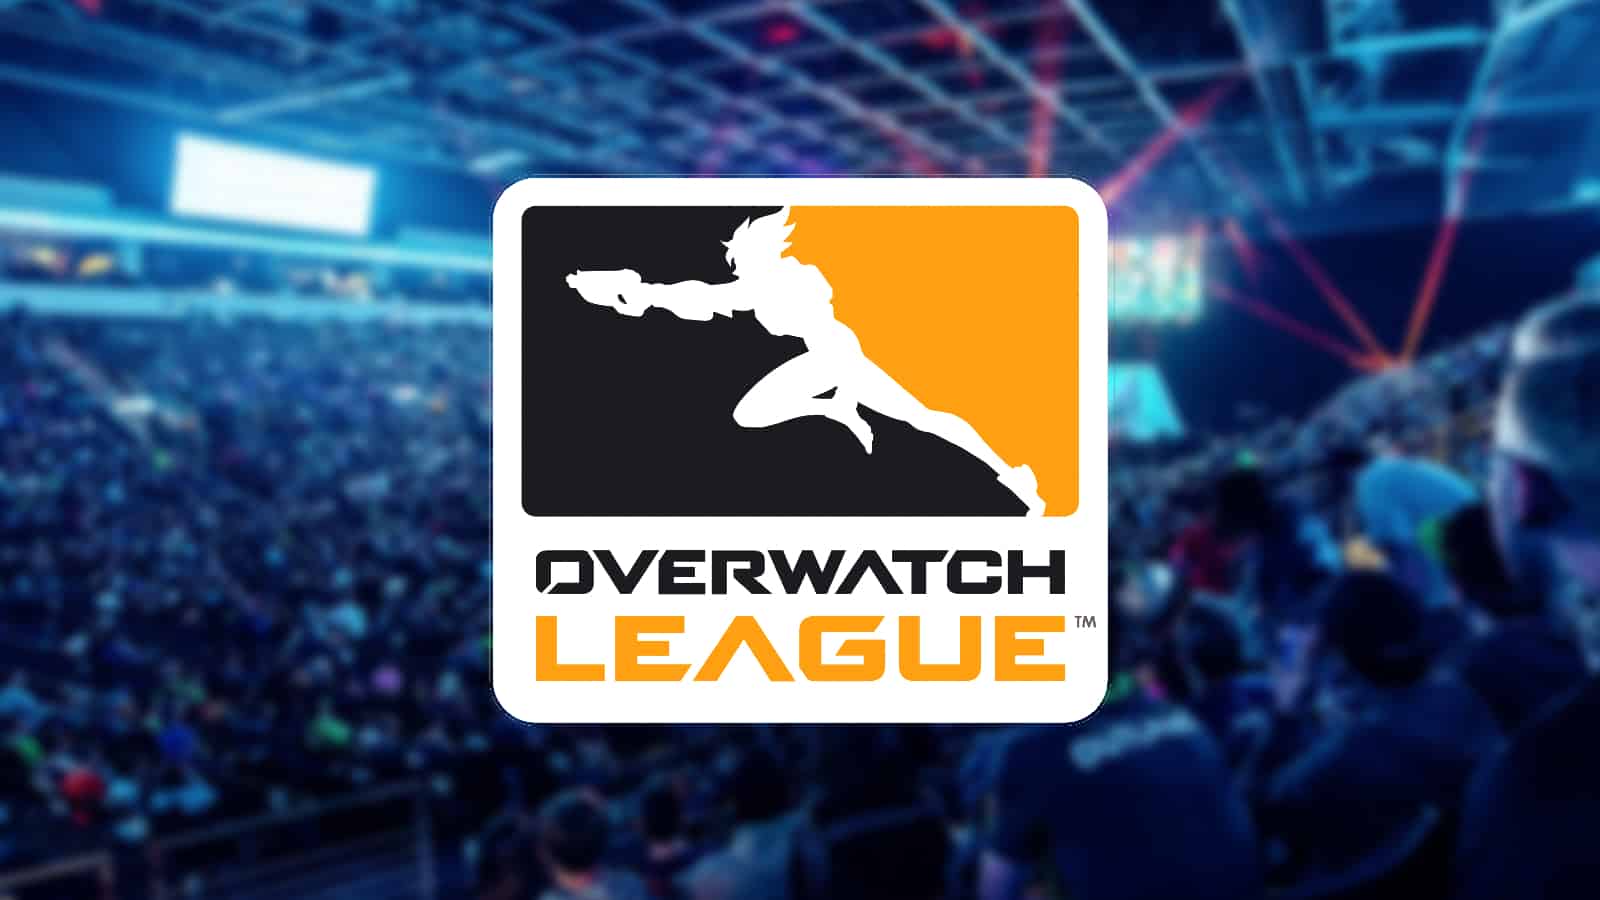 Guide to getting tokens for the new Overwatch League season